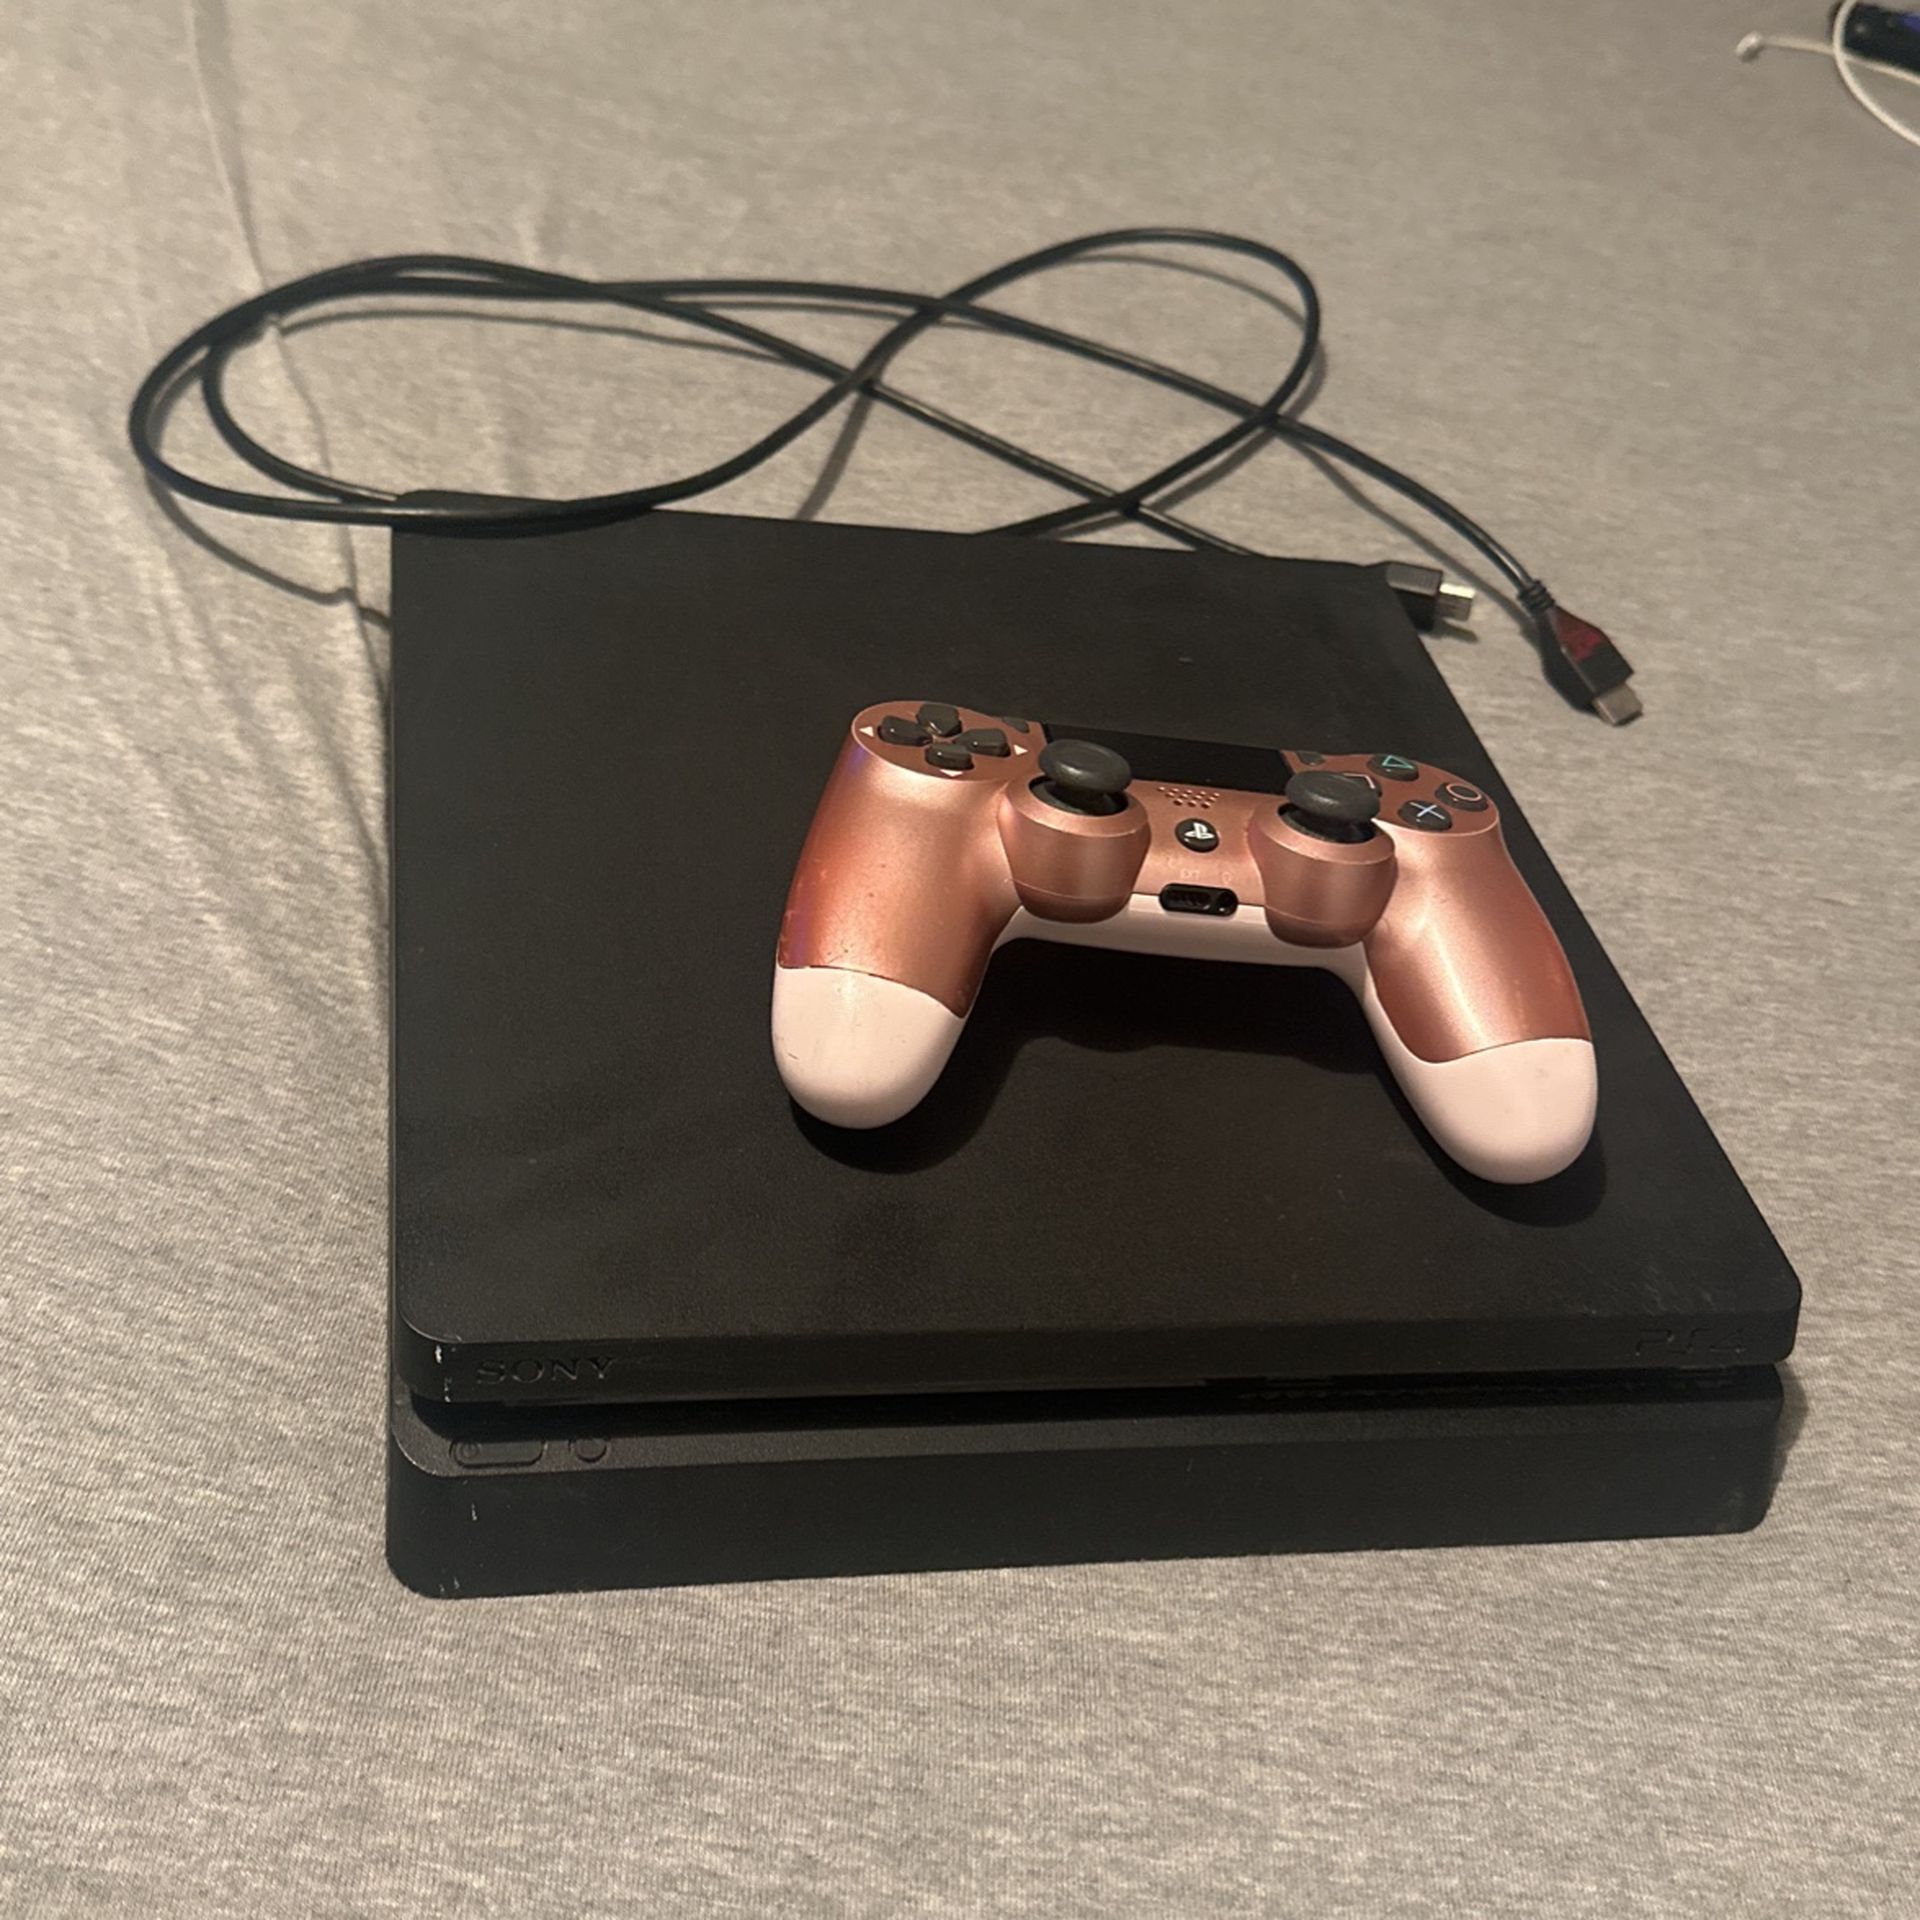 Ps4 With Controller, Usb Cable, Headphones, And Games